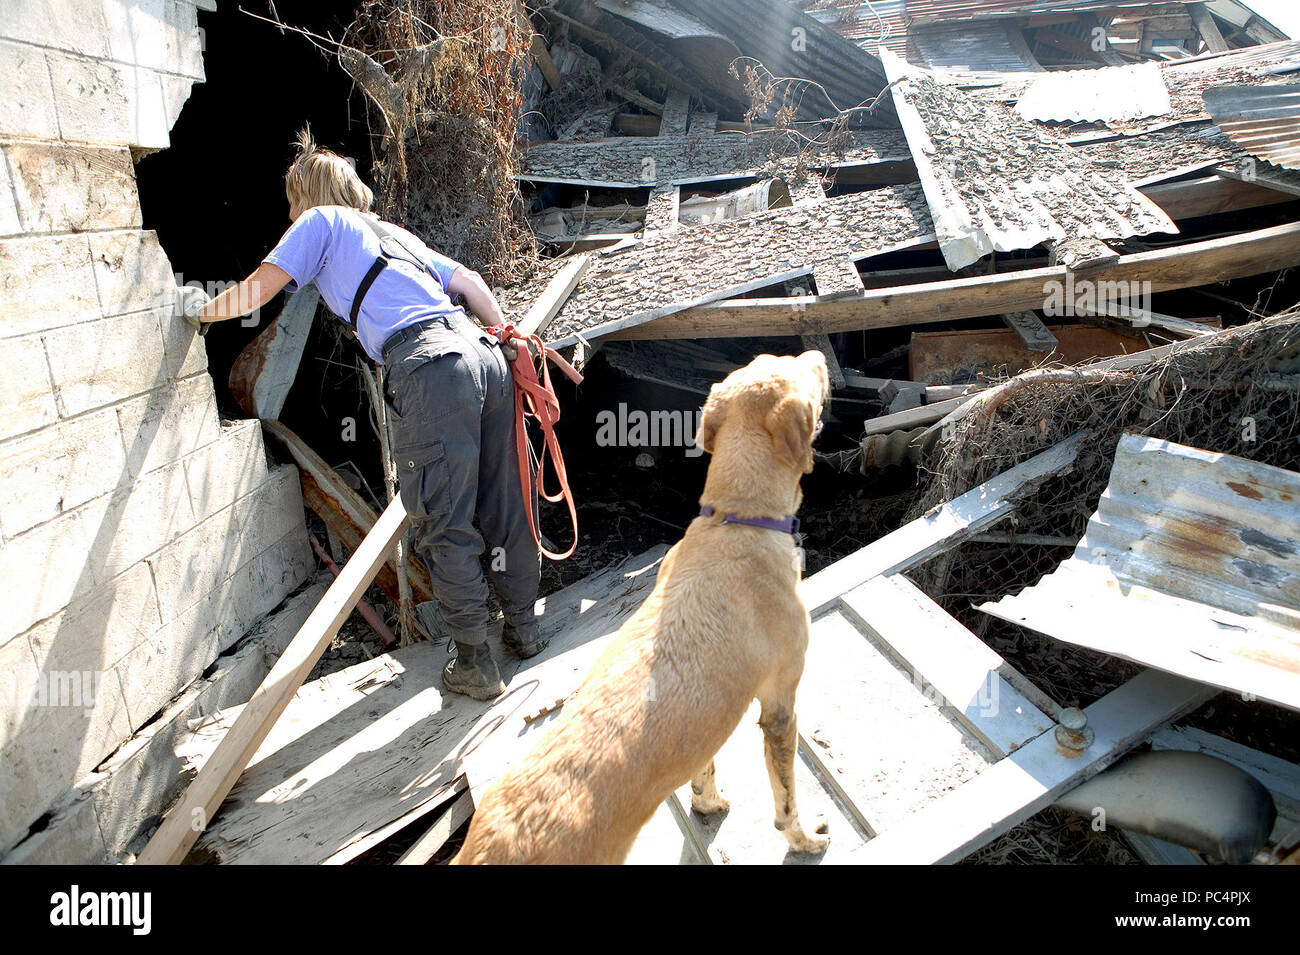 New Orleans, LA.,10/15/2005--K9 Search and Rescue handler, Pat Tuholske and her yellow labrador retriever, Finn search homes for missing people in the Lower 9th Ward following devastating hurricane Katrina. Stock Photo